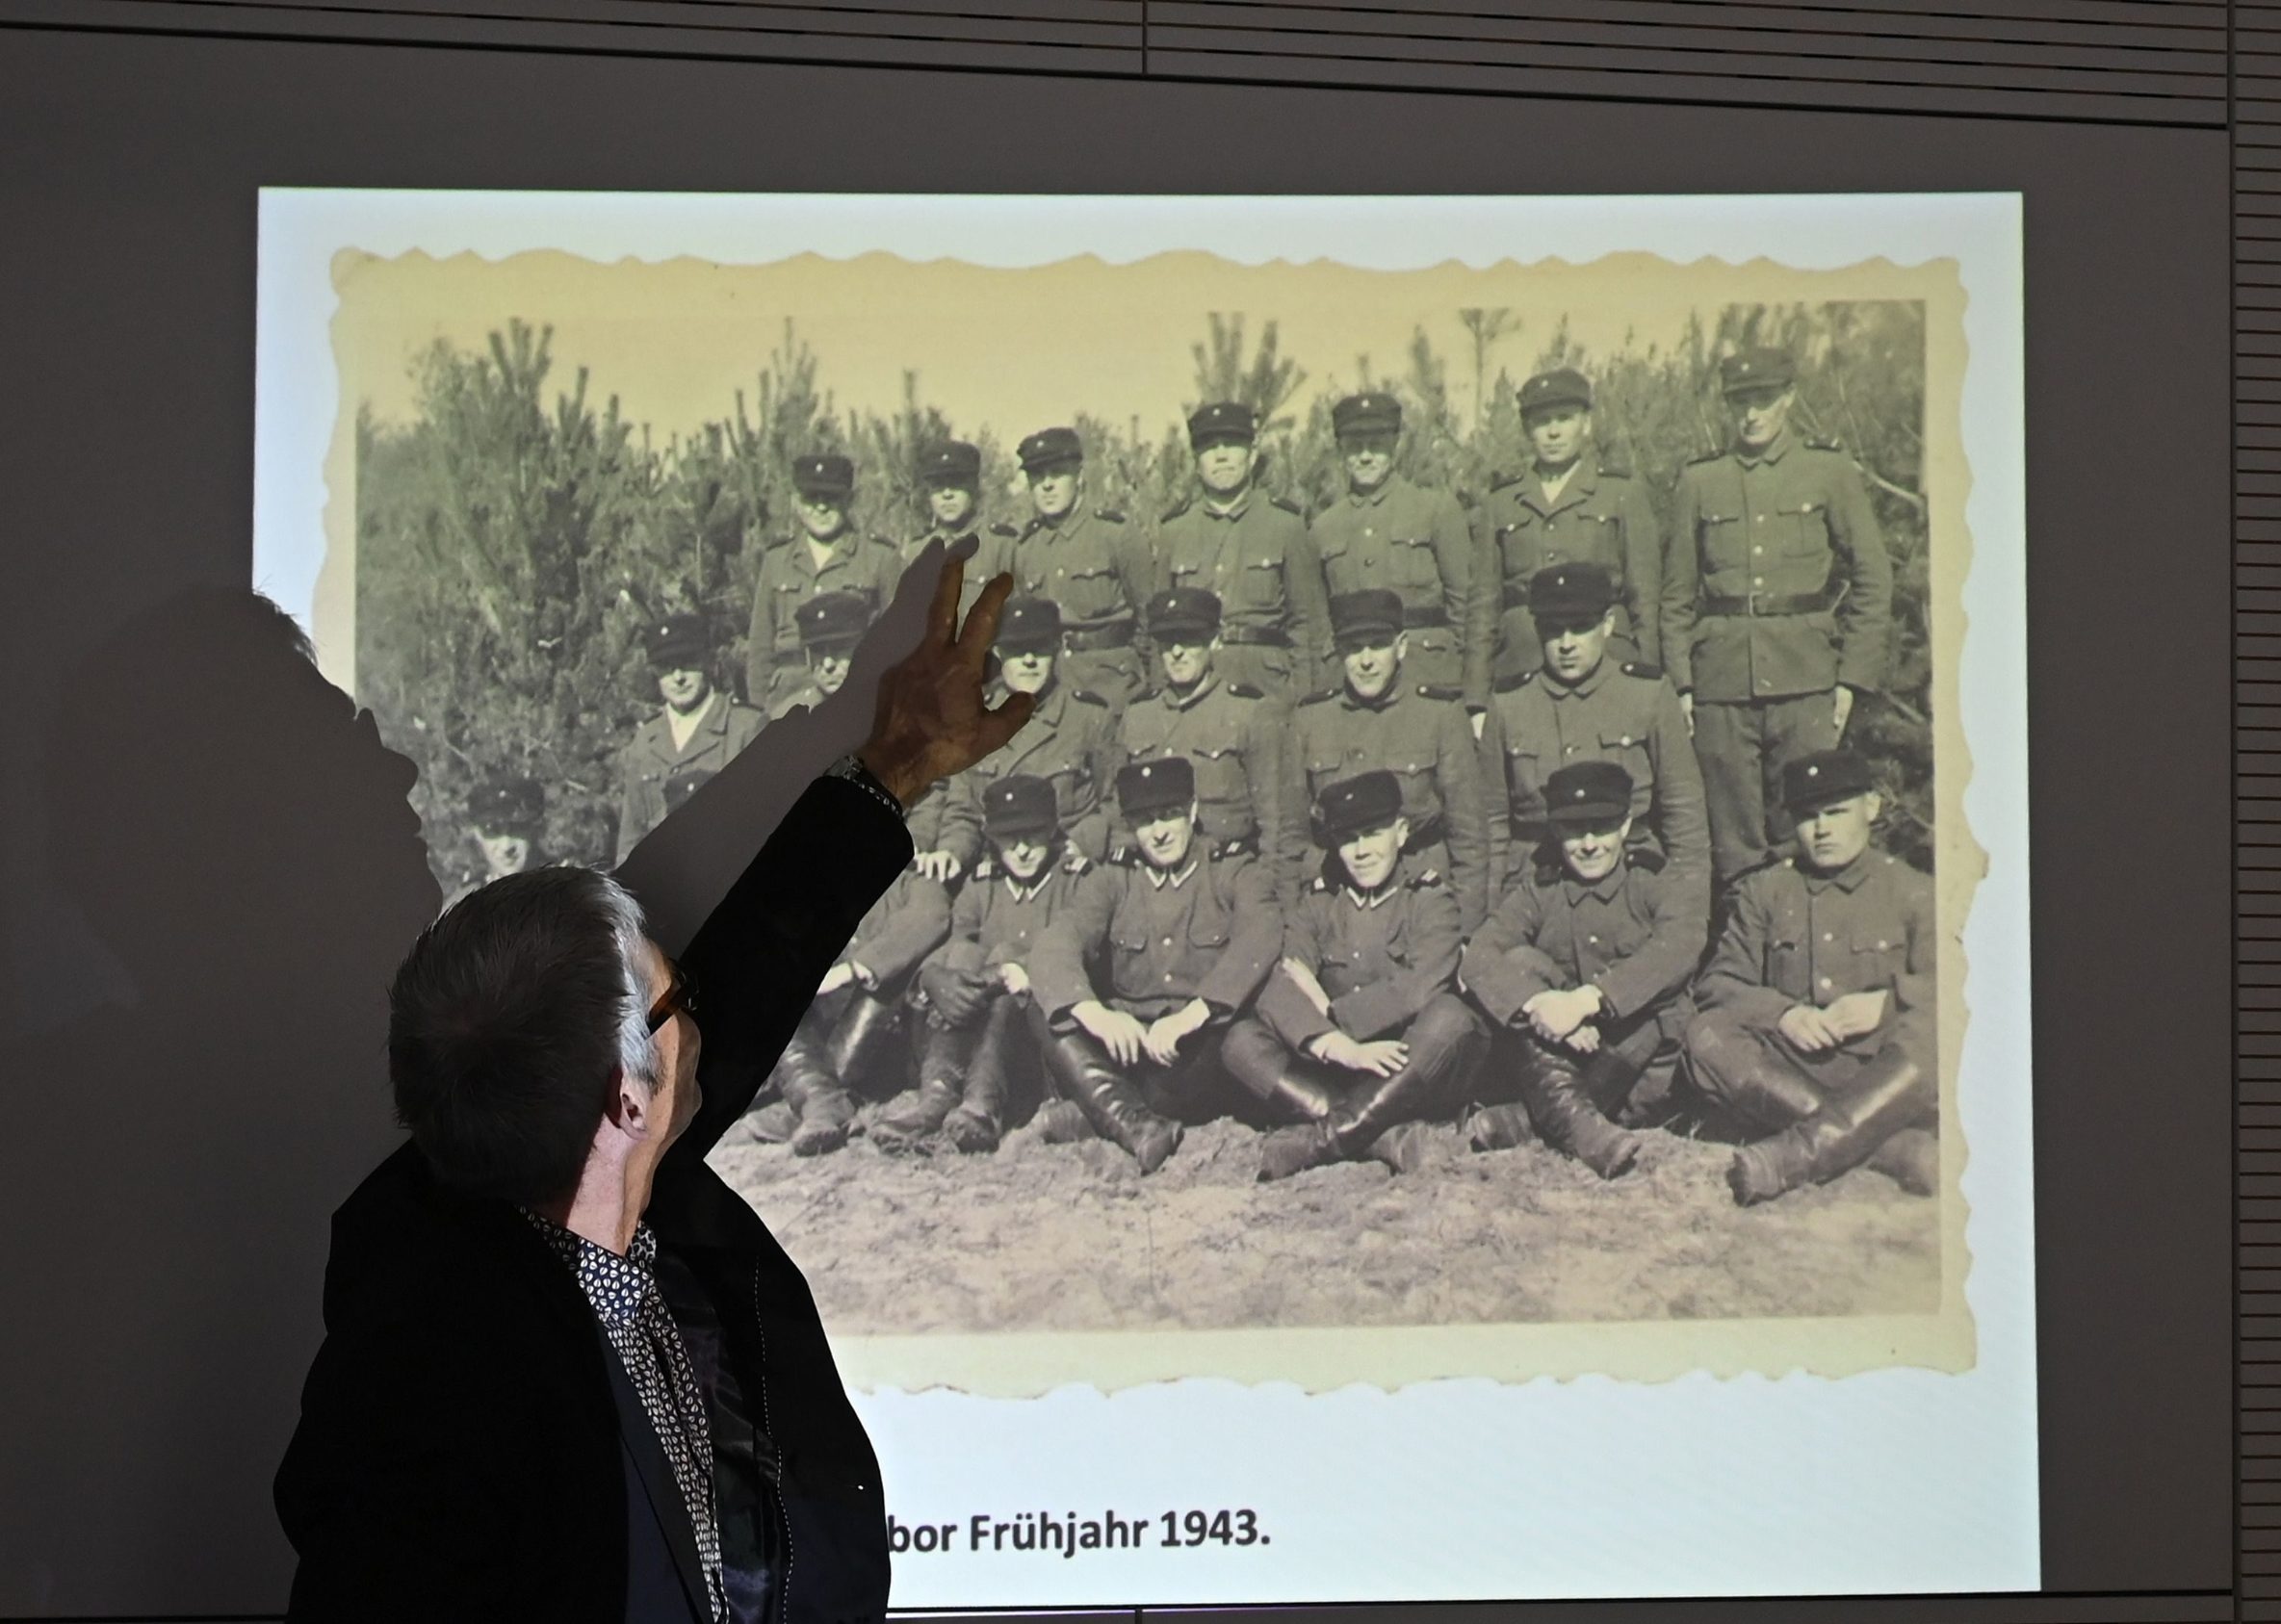 A staff member of the Topography of Terror archive points at a historical photograph allegedly showing John Demjanjuk during a press conference on newly discovered photos from Sobibor Nazi death camp on January 28, 2020 in Berlin. - Berlin-based Topography of Terror archive presented on January 28, 2020 newly discovered photos from the former Nazi concentration camp Sobibor. (Photo by Tobias SCHWARZ / AFP) / RESTRICTED TO EDITORIAL USE / TO ILLUSTRATE THE EVENT AS SPECIFIED IN THE CAPTION